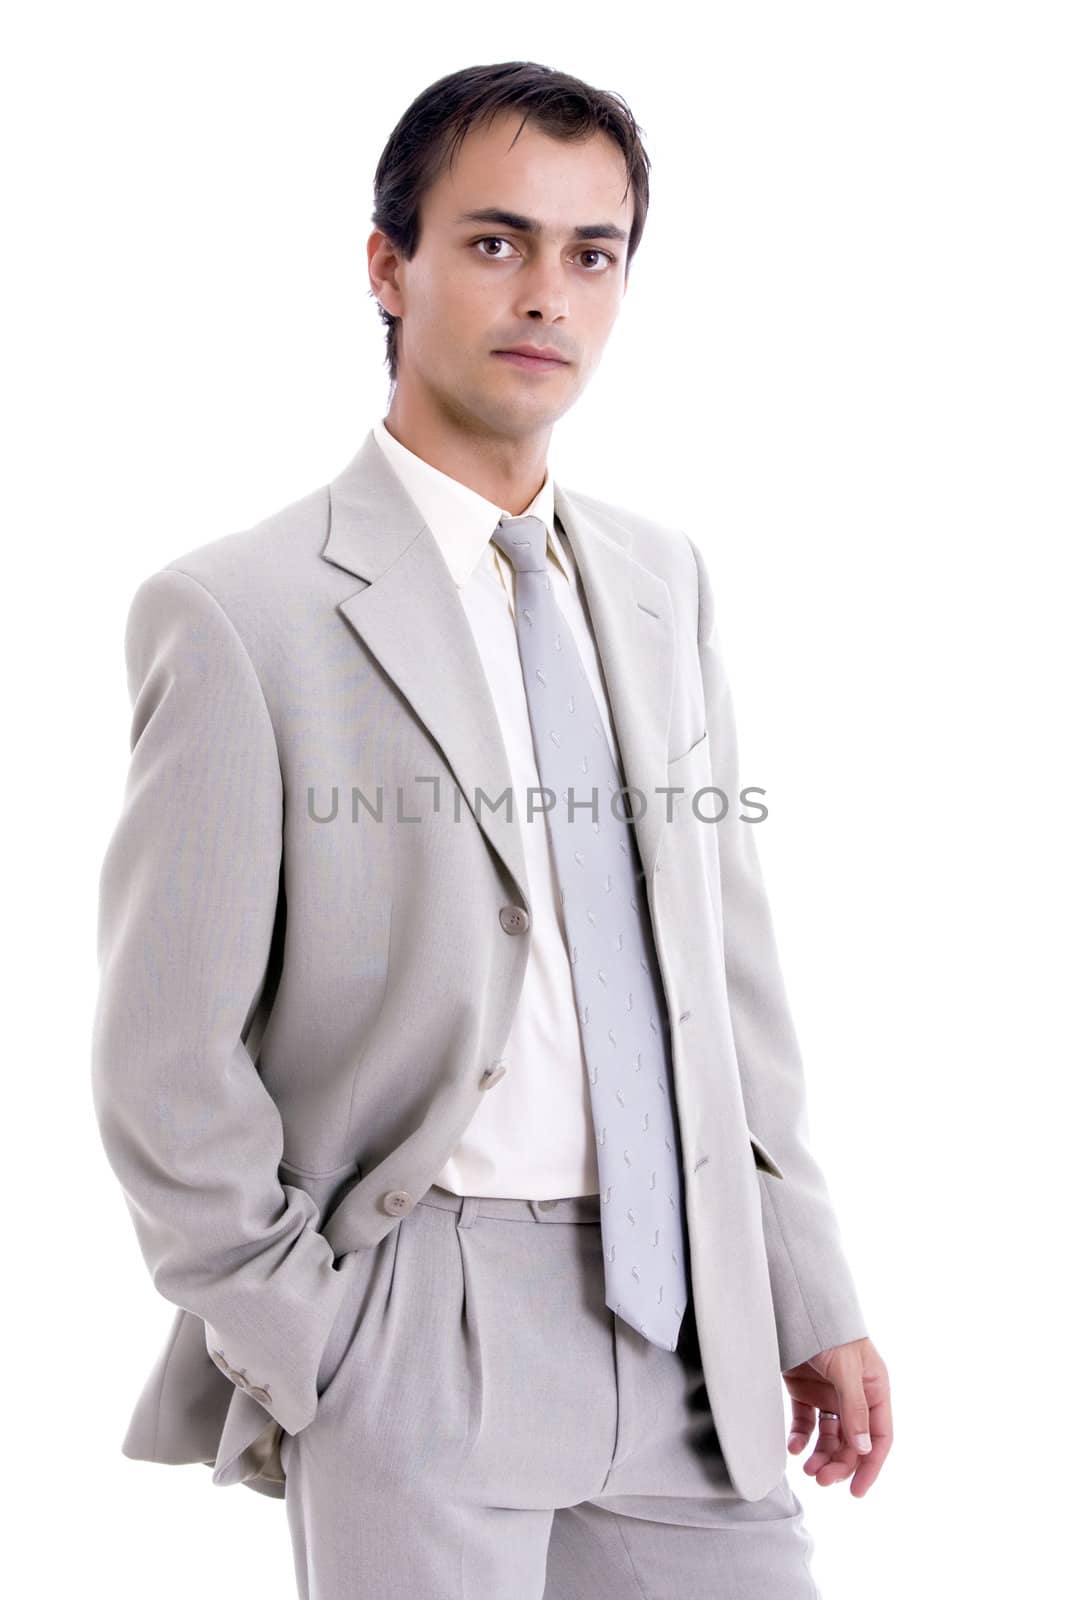 young business men portrait on white
